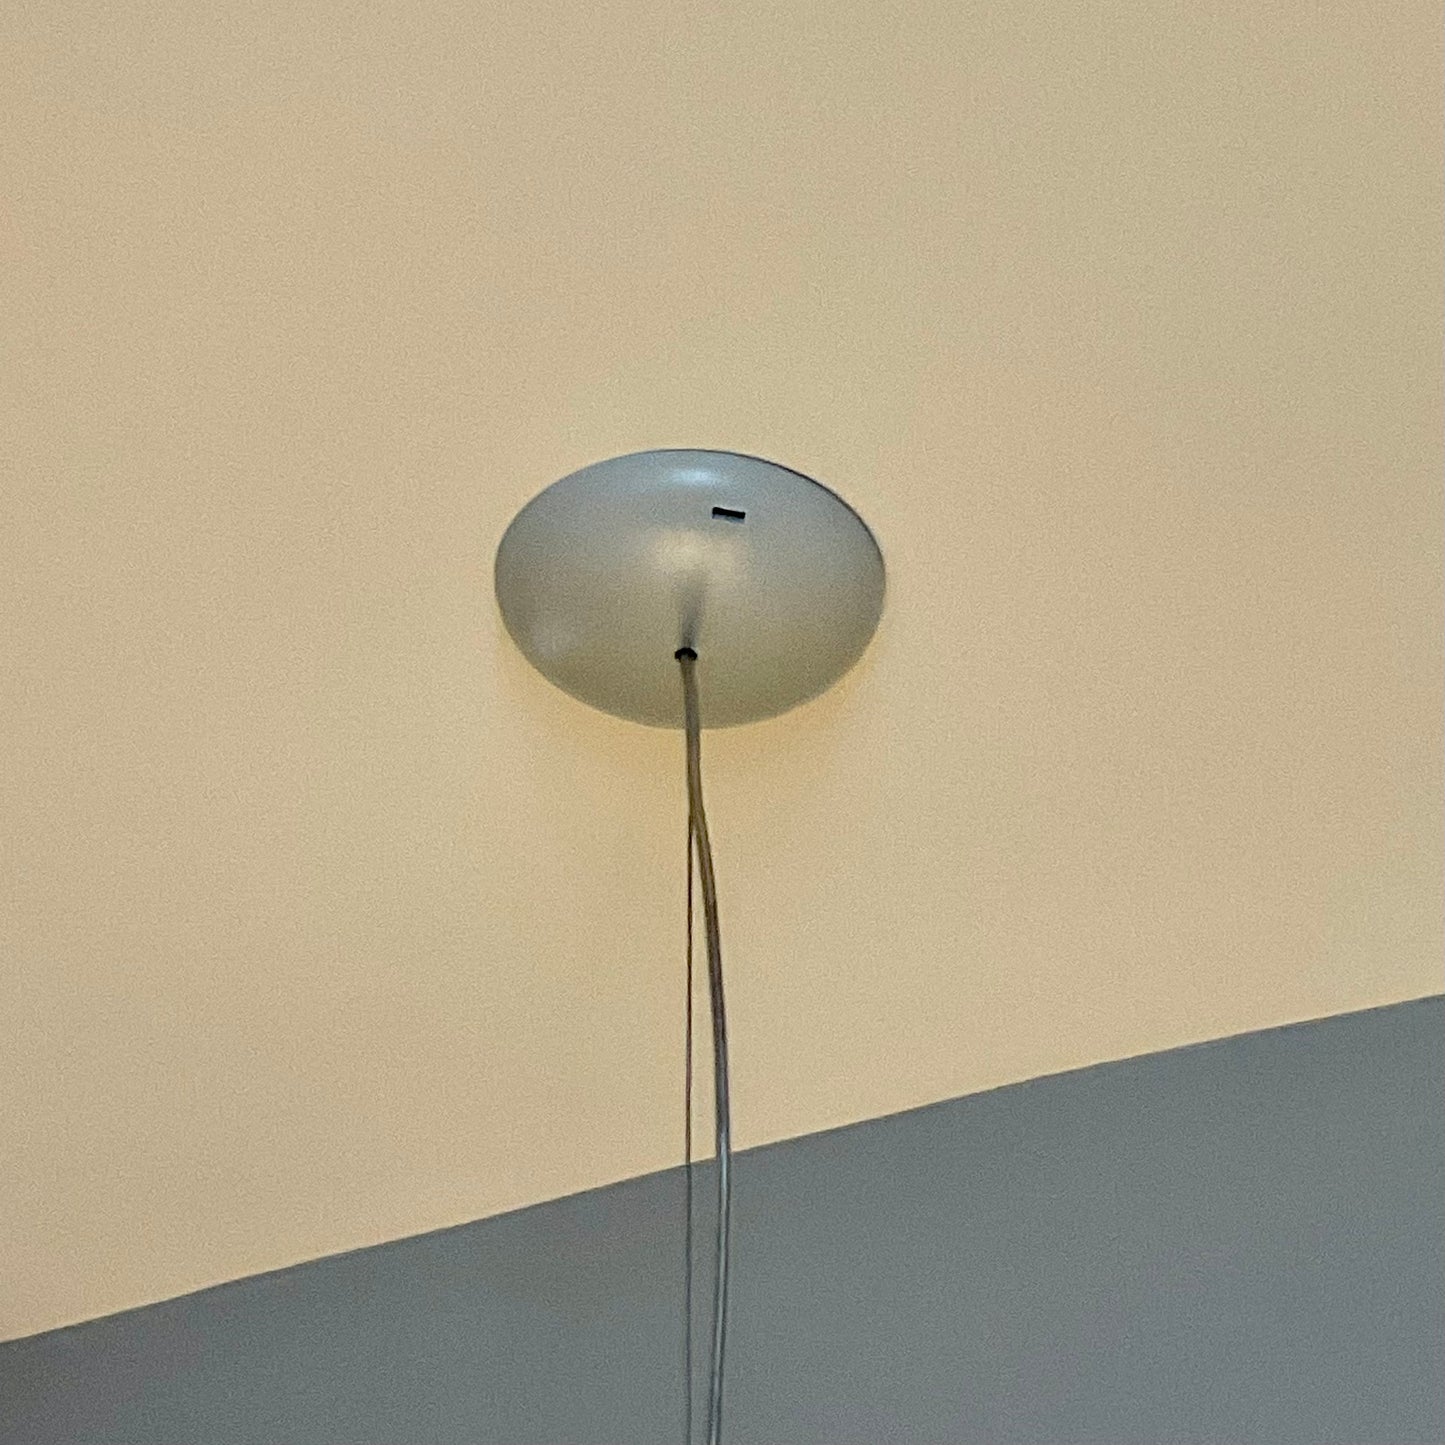 Load image into Gallery viewer, Glo-Ball Suspension Lamp by Jasper Morrison for Flos
